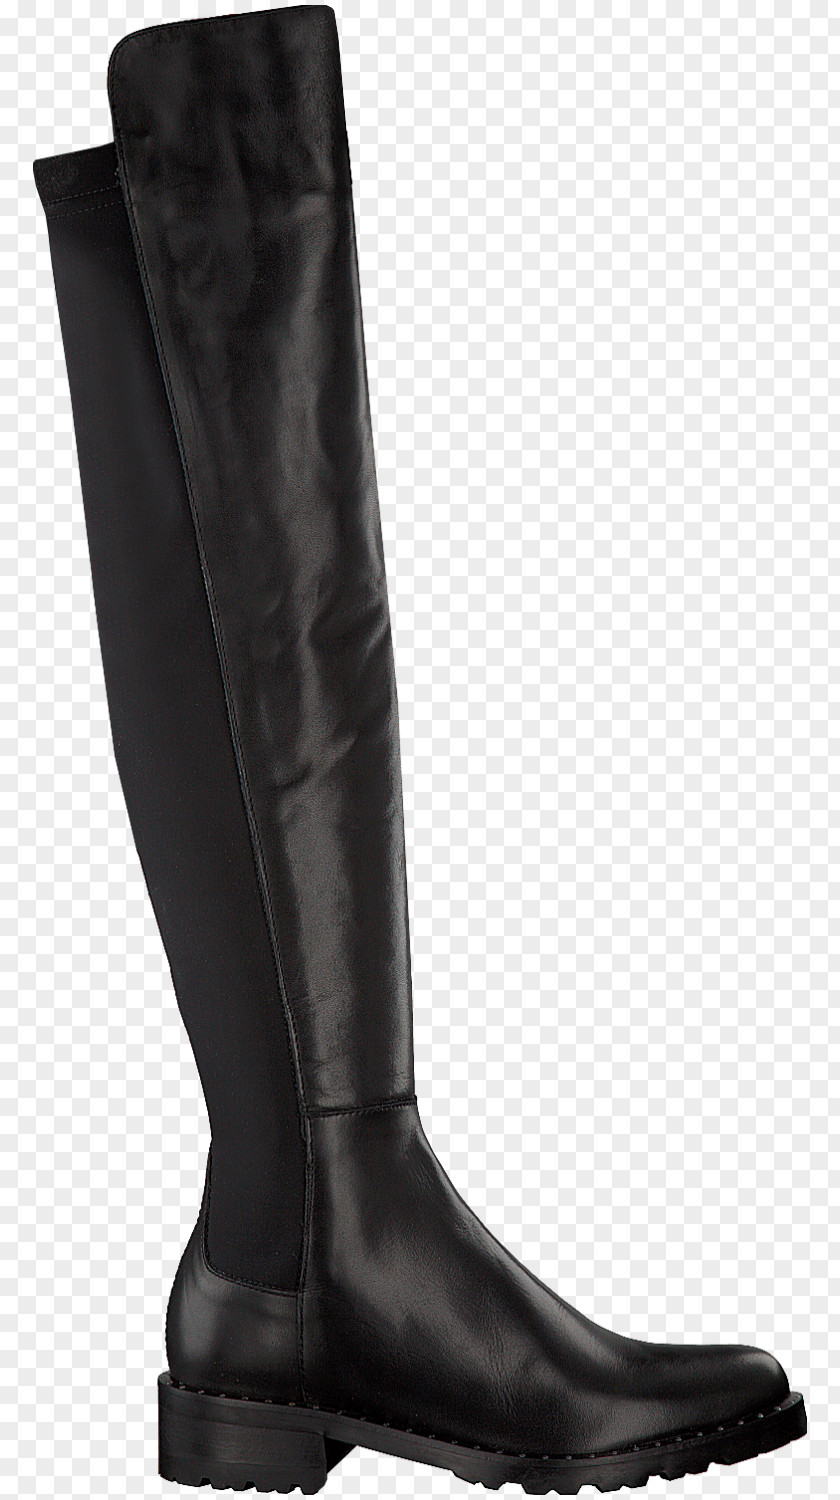 Knee High Boots Riding Boot Shoe Leather Footwear PNG